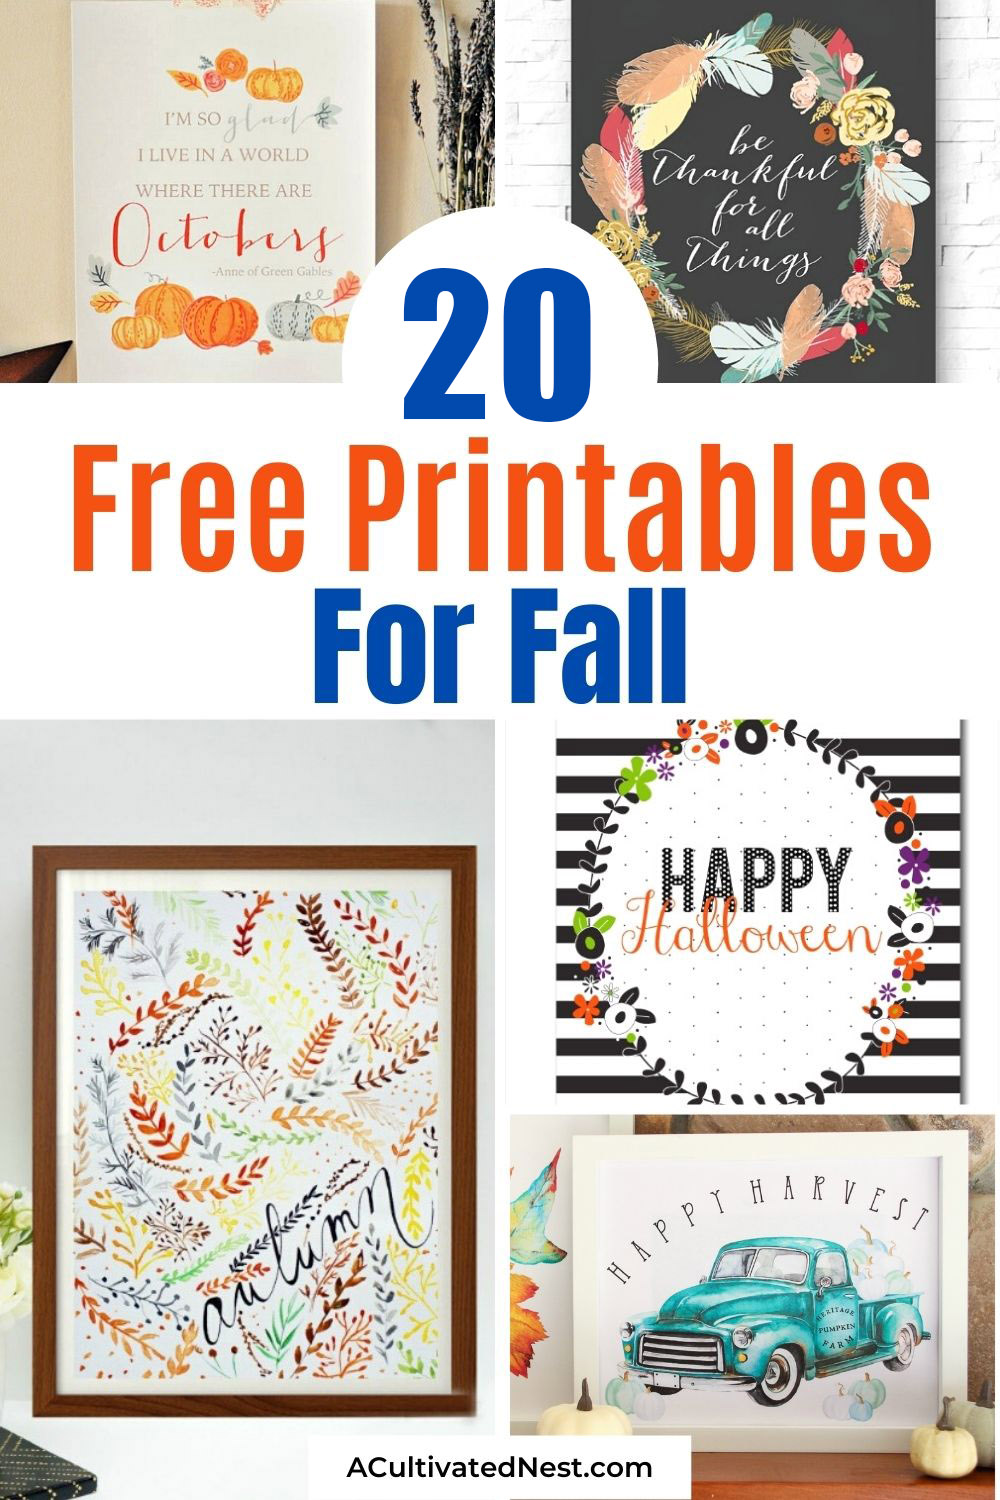 20 Pretty Free Fall Printables- These free printables for fall, Thanksgiving, and Halloween will help you update your home's decor on a budget! There are so many beautiful free wall art printables to choose from! | #fallPrintables #HalloweenPrintables #fallDecor #printables #ACultivatedNest